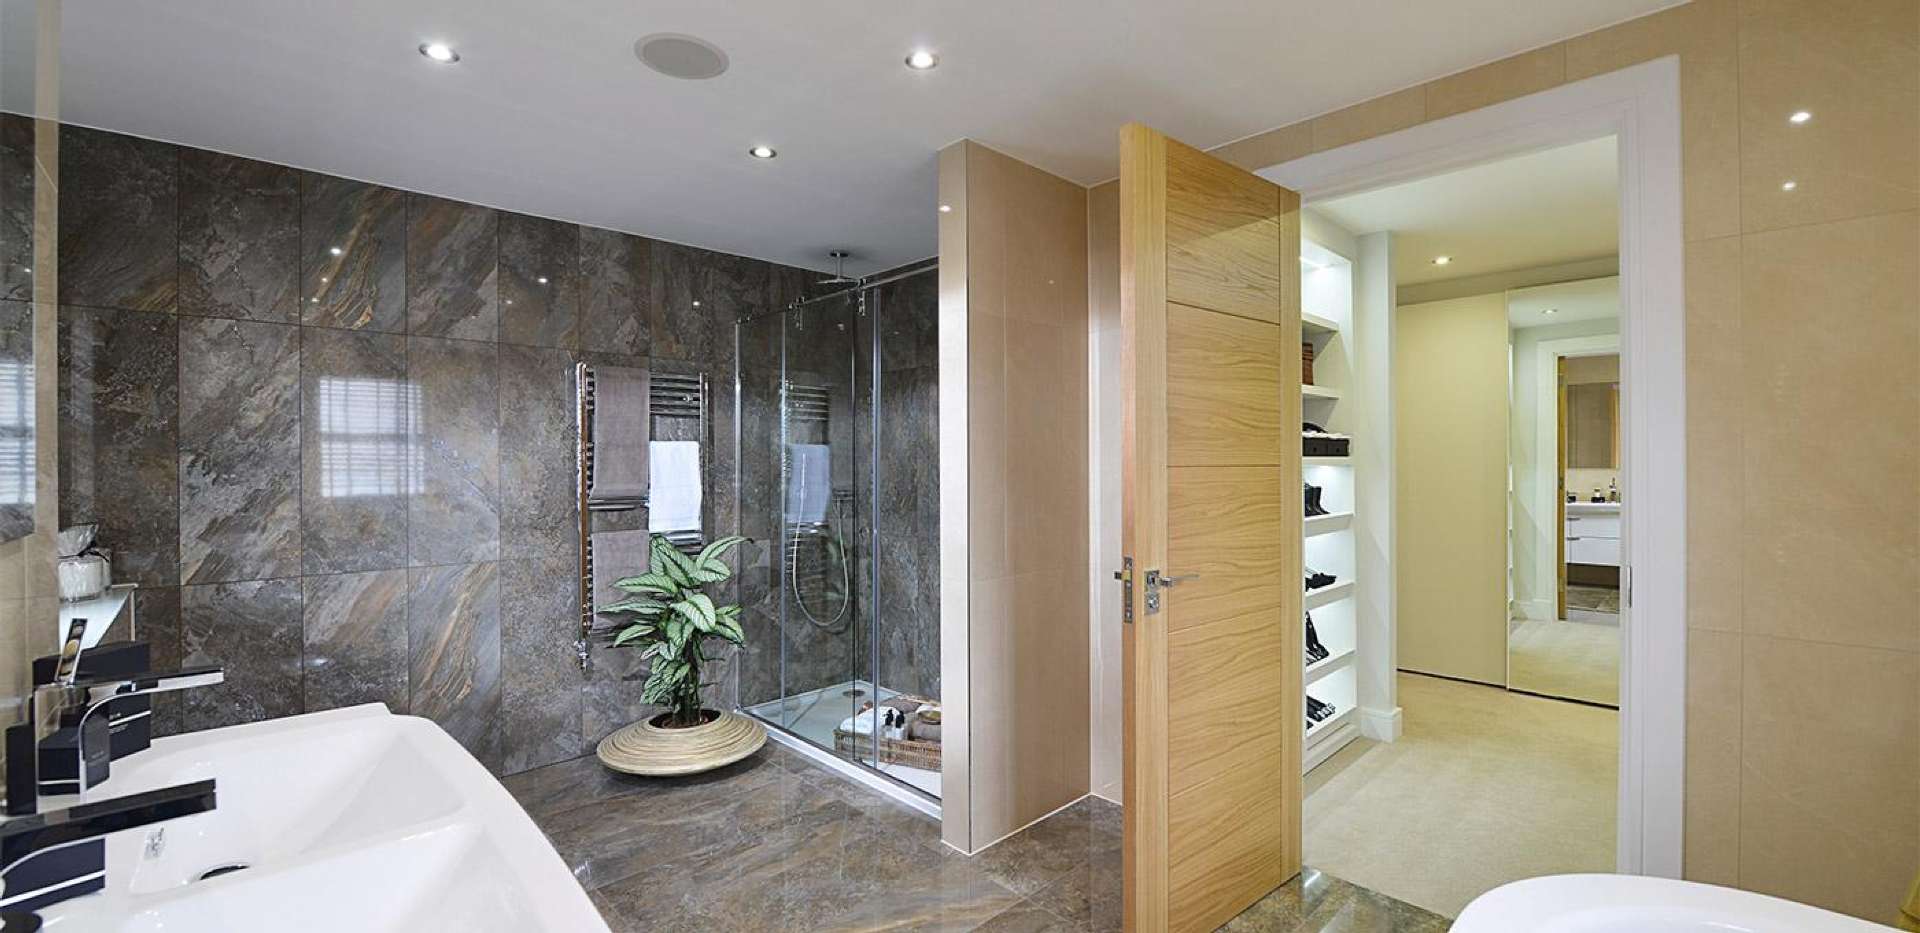 St James, Queen Mary's Place, Show Home, Bathroom, En-suite, Dressing Area, Interior